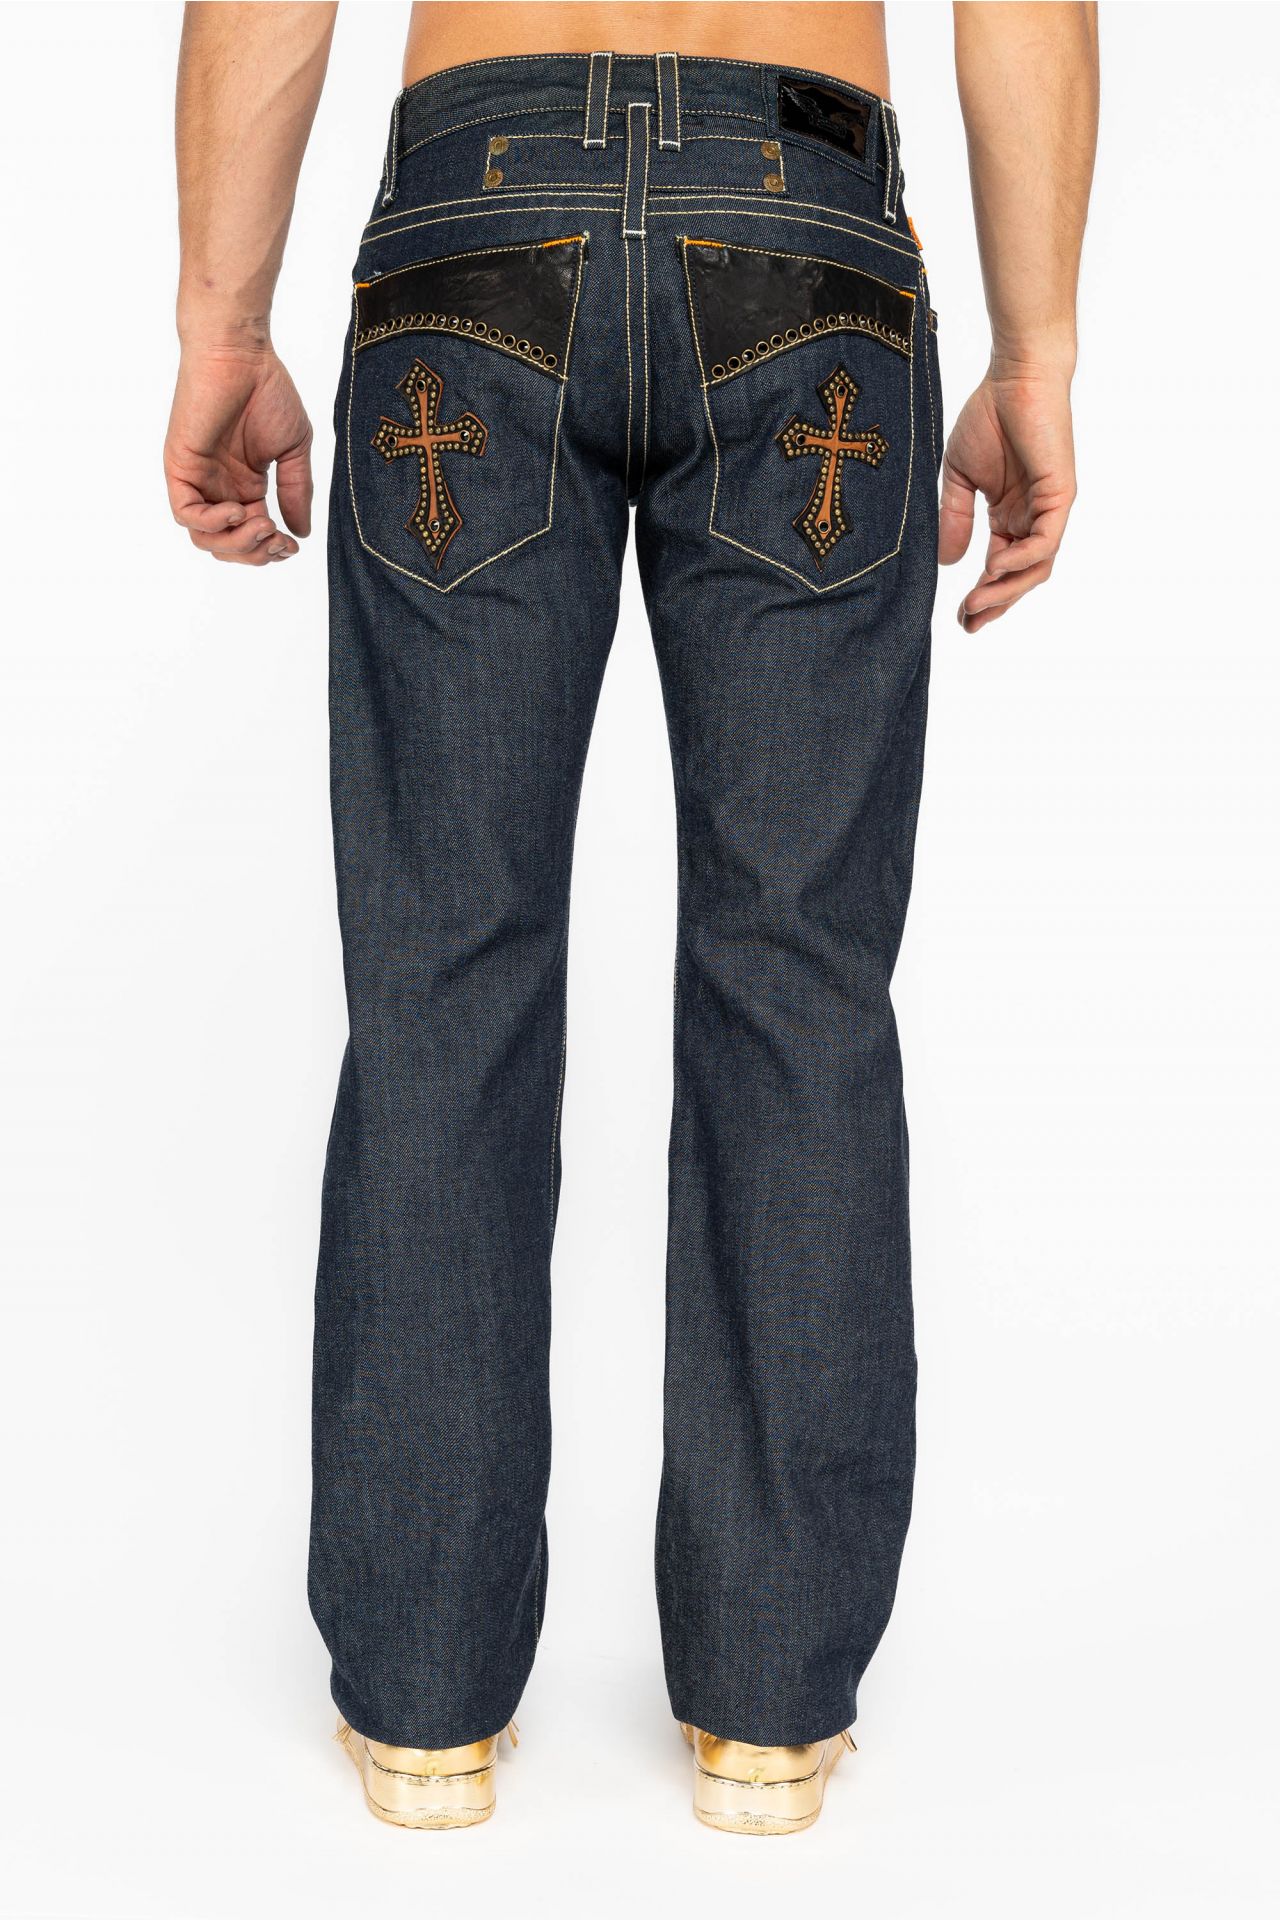 ROBIN'S RAW DENIM COLLECTION MENS STRAIGHT GOTHIC CROSS JEANS WITH LEATHER PATCHES WITH CRYSTALS